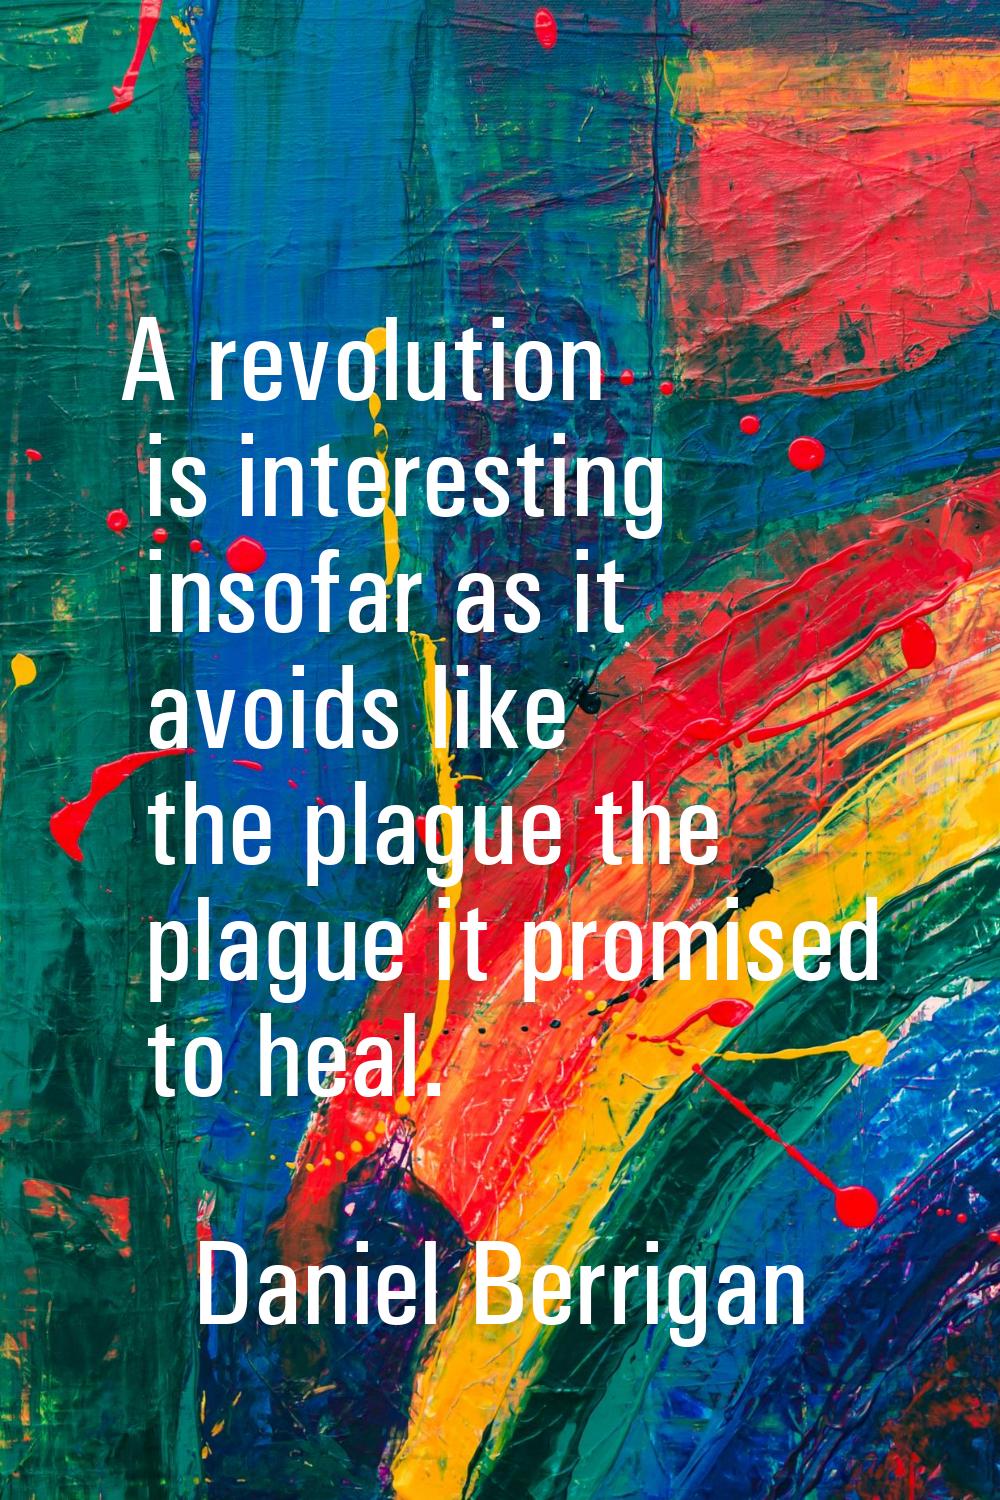 A revolution is interesting insofar as it avoids like the plague the plague it promised to heal.